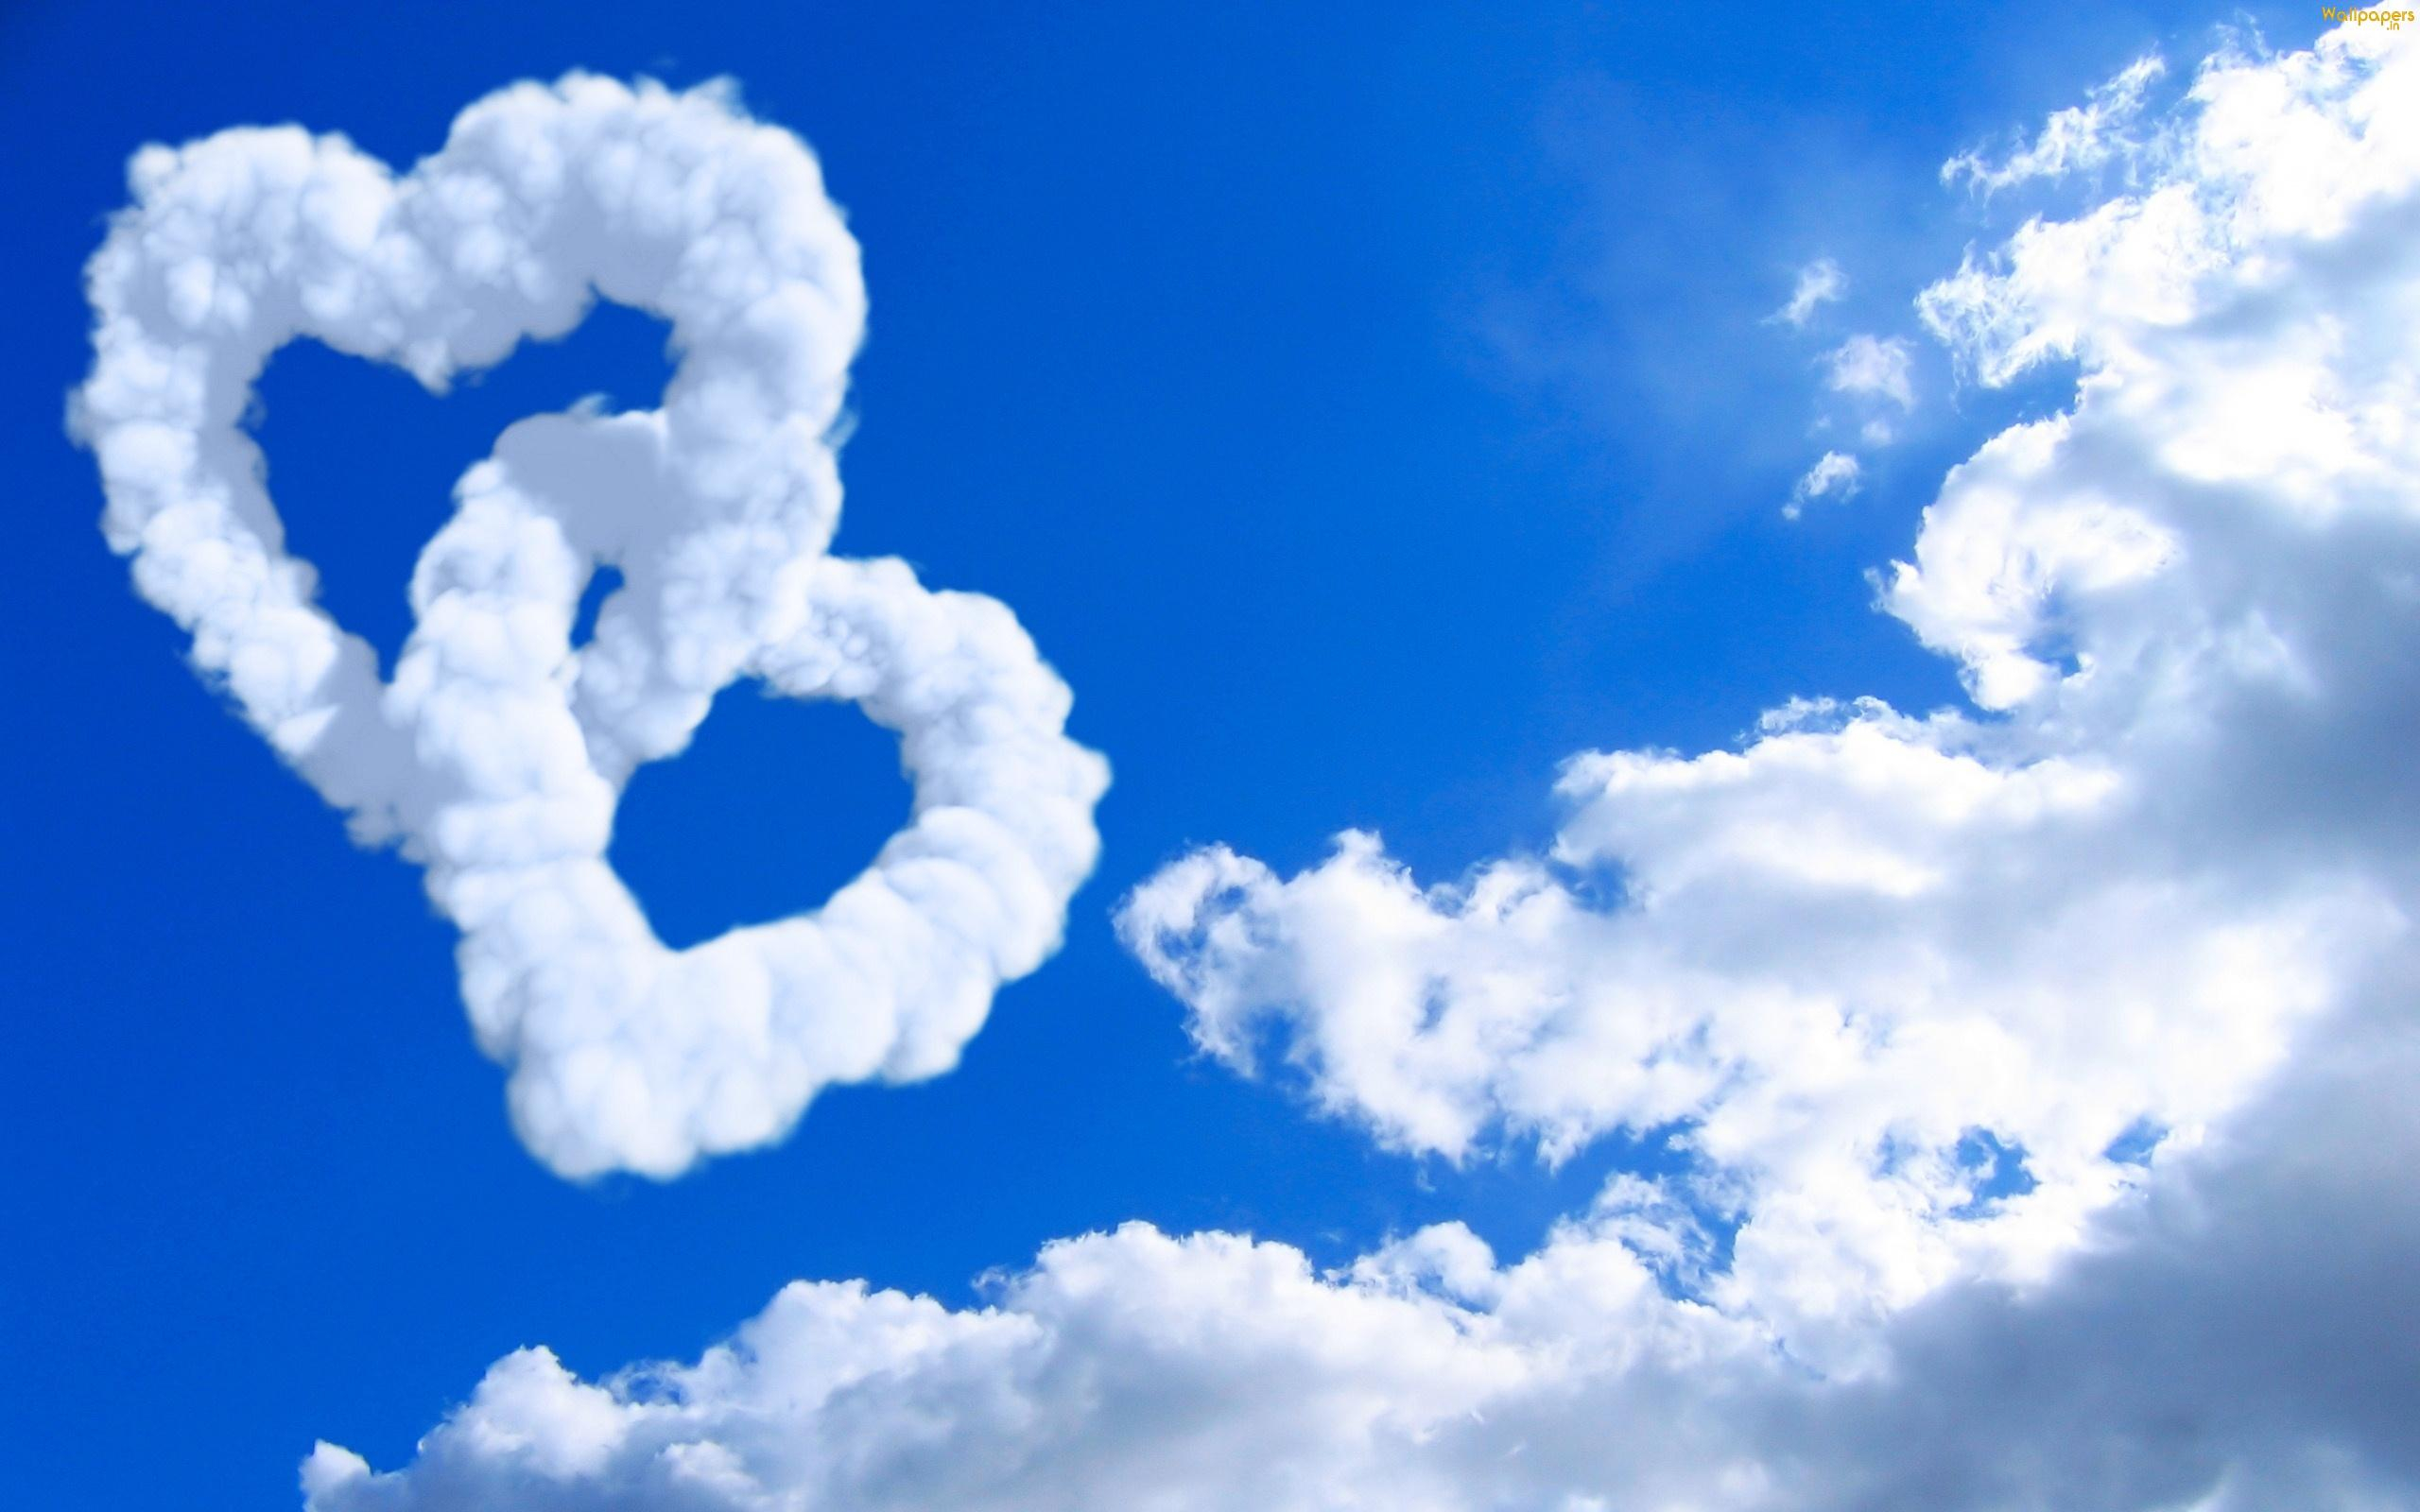 2560x1600 True love on the sky two hearts made from clouds